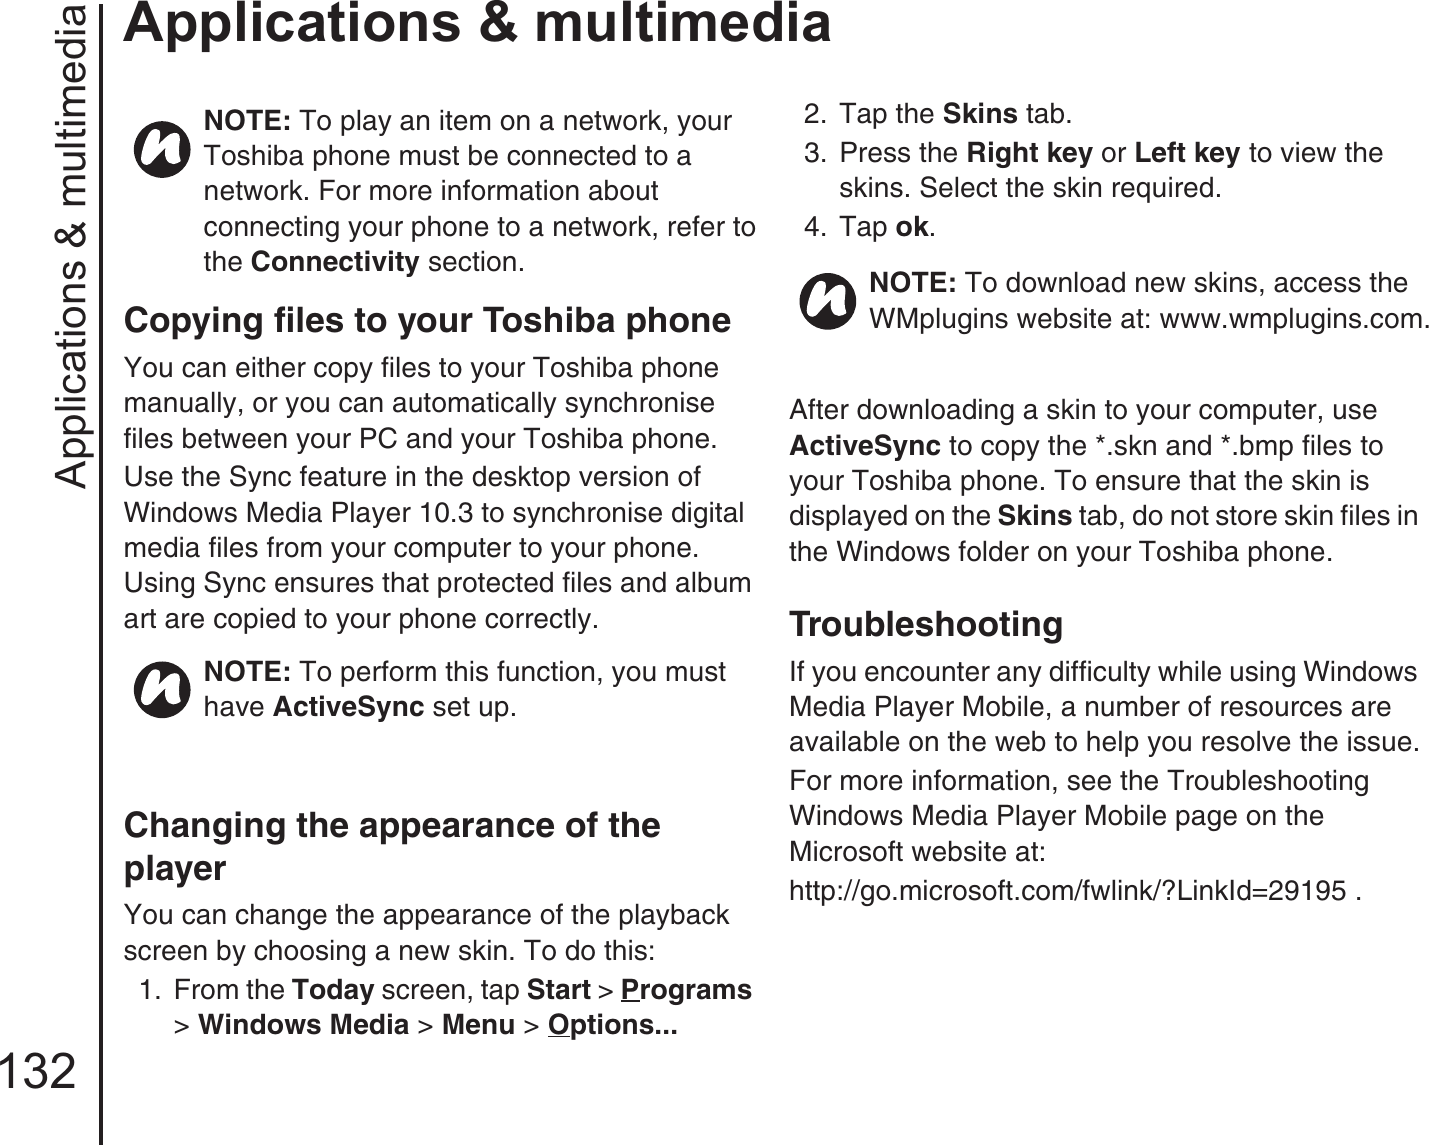 Applications &amp; multimedia132Applications &amp; multimediaCopying files to your Toshiba phoneYou can either copy files to your Toshiba phone manually, or you can automatically synchronise files between your PC and your Toshiba phone.Use the Sync feature in the desktop version of Windows Media Player 10.3 to synchronise digital media files from your computer to your phone. Using Sync ensures that protected files and album art are copied to your phone correctly.Changing the appearance of the playerYou can change the appearance of the playback screen by choosing a new skin. To do this:1.  From the Today screen, tap Start &gt; Programs &gt; Windows Media &gt; Menu &gt; Options... 2.  Tap the Skins tab.3.  Press the Right key or Left key to view the skins. Select the skin required.4.  Tap ok.After downloading a skin to your computer, use ActiveSync to copy the *.skn and *.bmp files to your Toshiba phone. To ensure that the skin is displayed on the Skins tab, do not store skin files in the Windows folder on your Toshiba phone.TroubleshootingIf you encounter any difficulty while using Windows Media Player Mobile, a number of resources are available on the web to help you resolve the issue.For more information, see the Troubleshooting Windows Media Player Mobile page on the Microsoft website at:http://go.microsoft.com/fwlink/?LinkId=29195 .NOTE: To play an item on a network, your Toshiba phone must be connected to a network. For more information about connecting your phone to a network, refer to the Connectivity section.NOTE: To perform this function, you must have ActiveSync set up.NOTE: To download new skins, access the WMplugins website at: www.wmplugins.com.